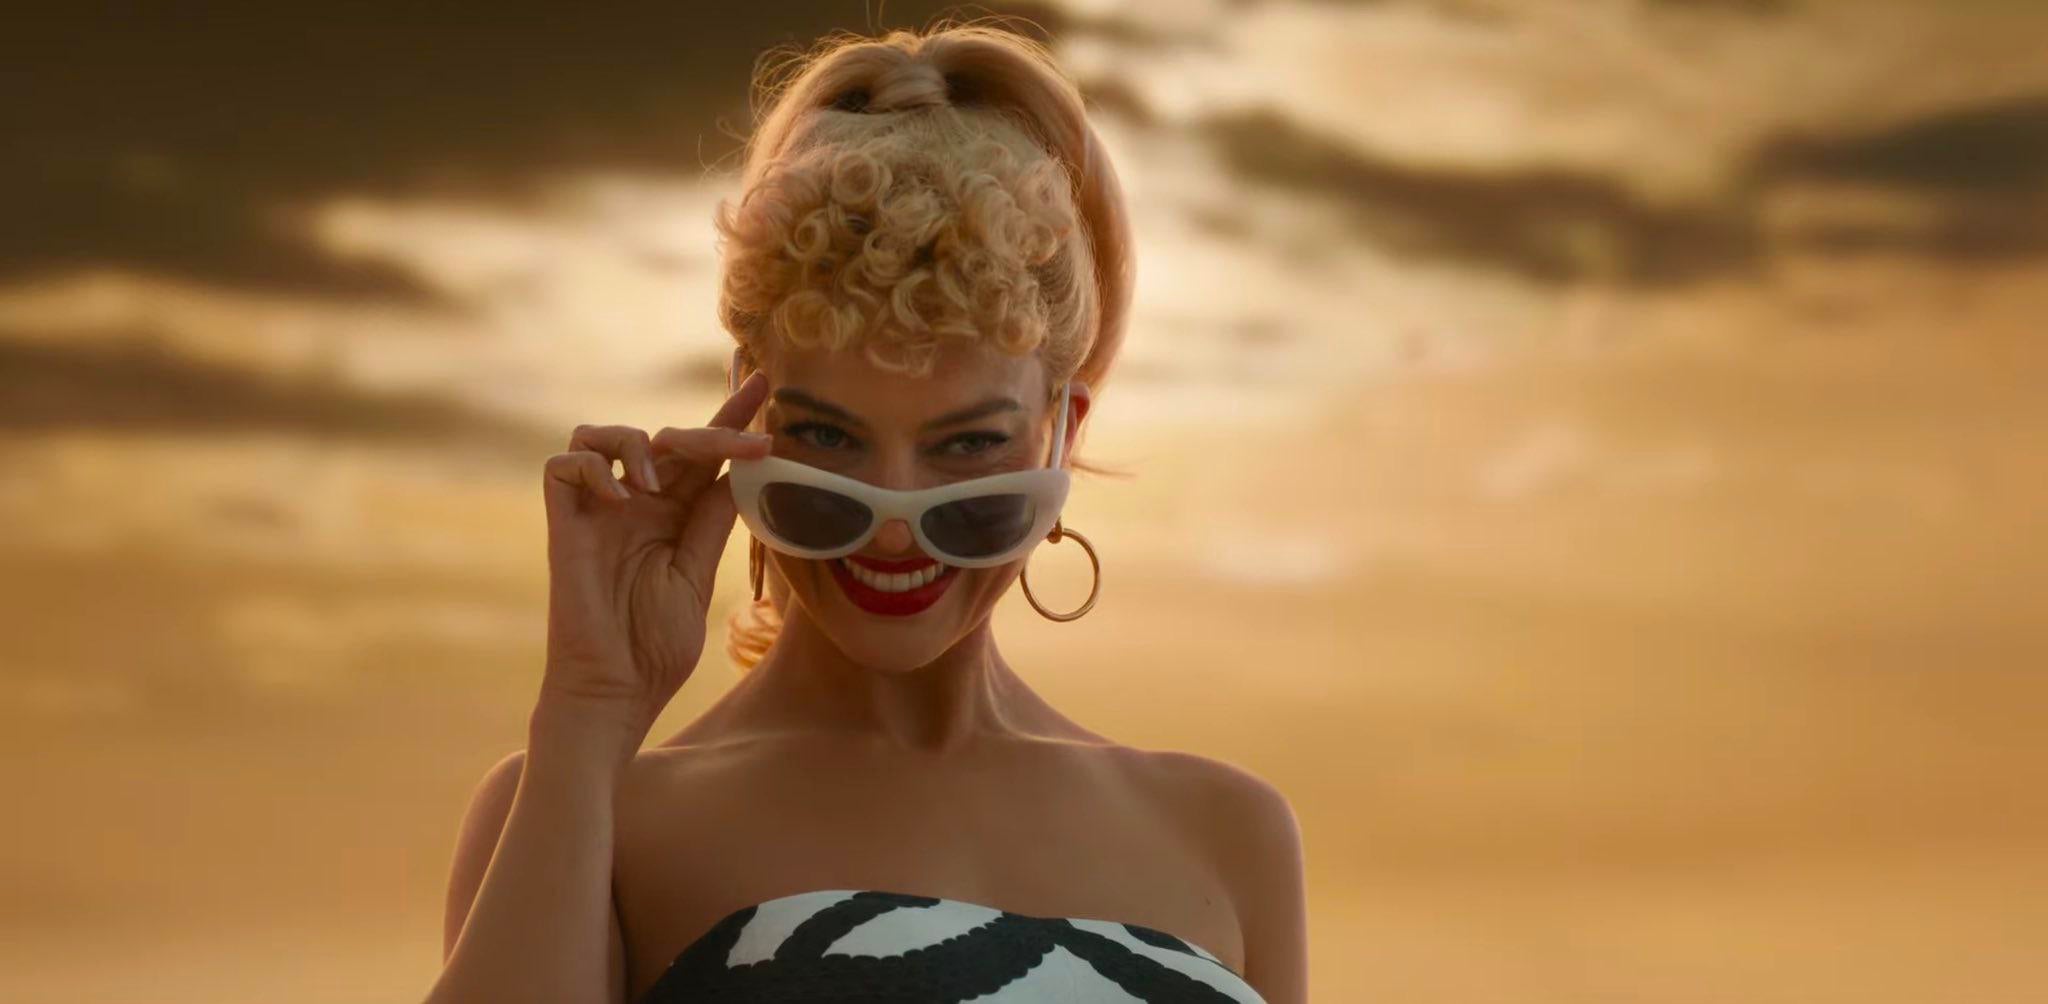 A New Look At Margot Robbie as Barbie in New Teaser! - Photo 10